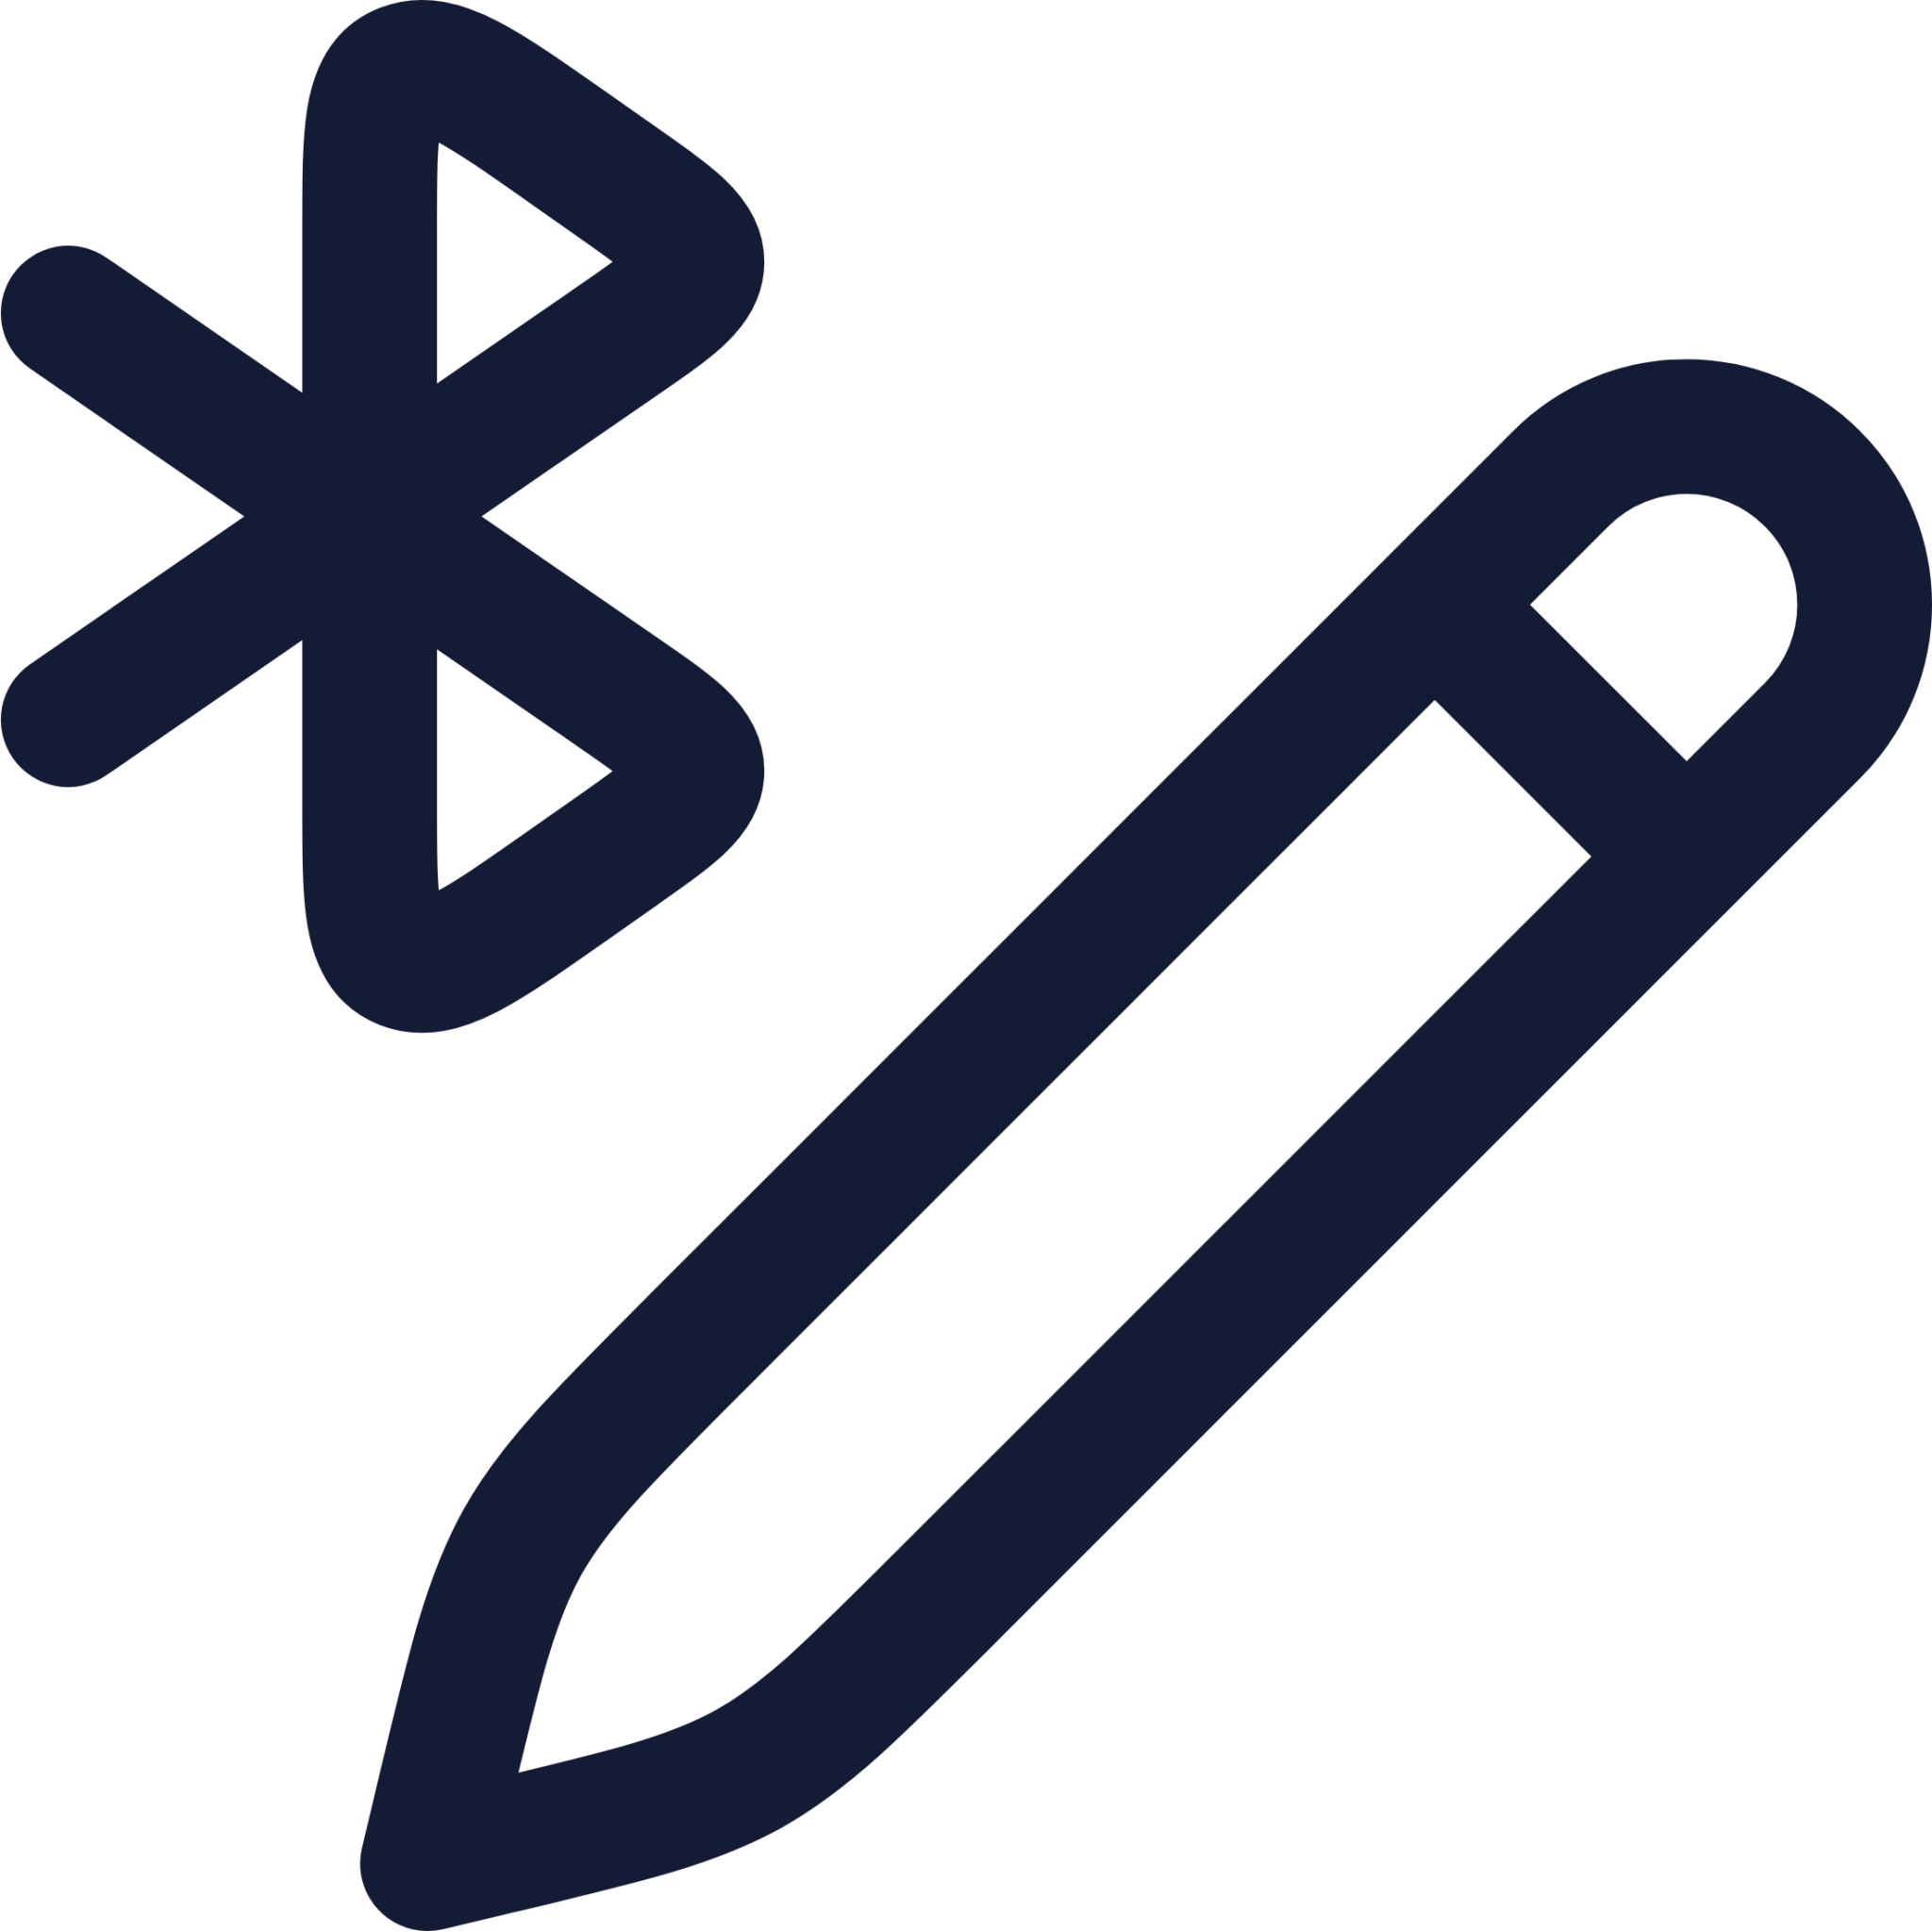 pen connect bluetooth icon